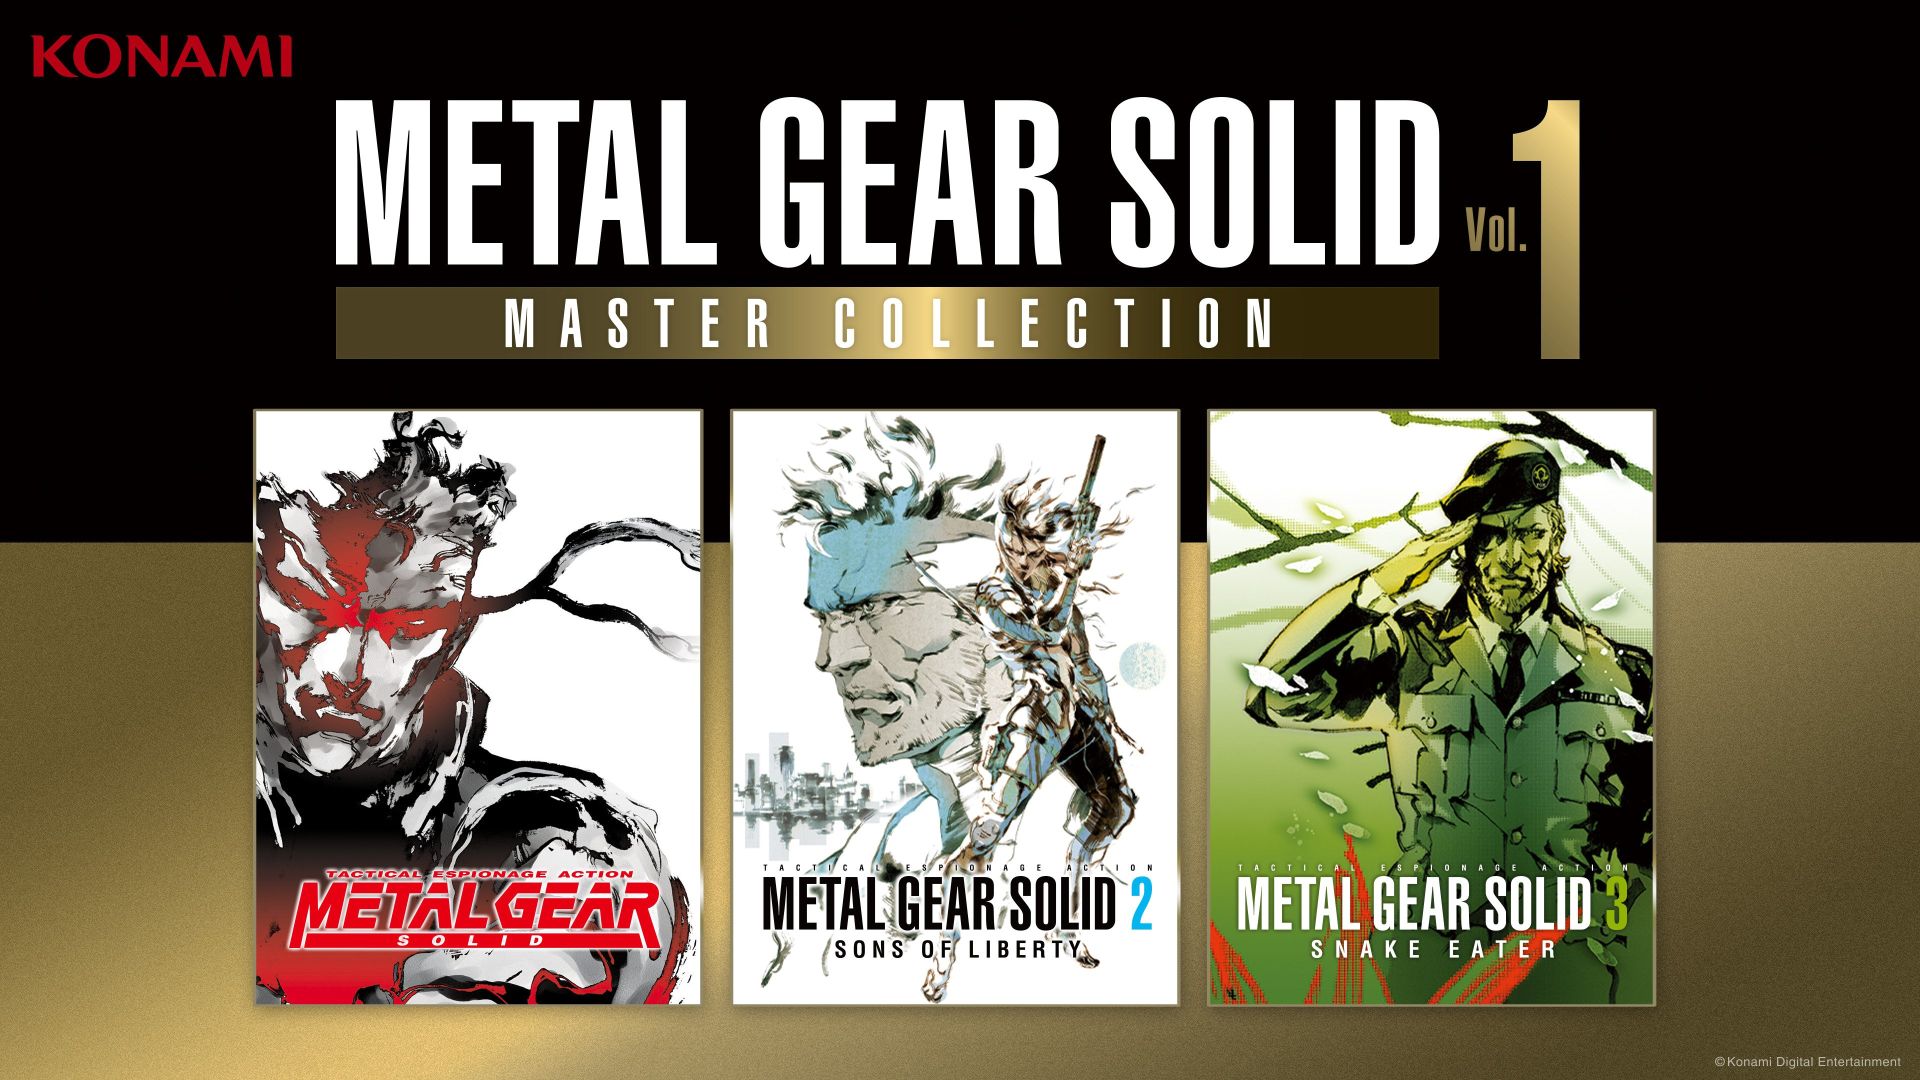 Master Collection Vol. 1 Launches October 24th